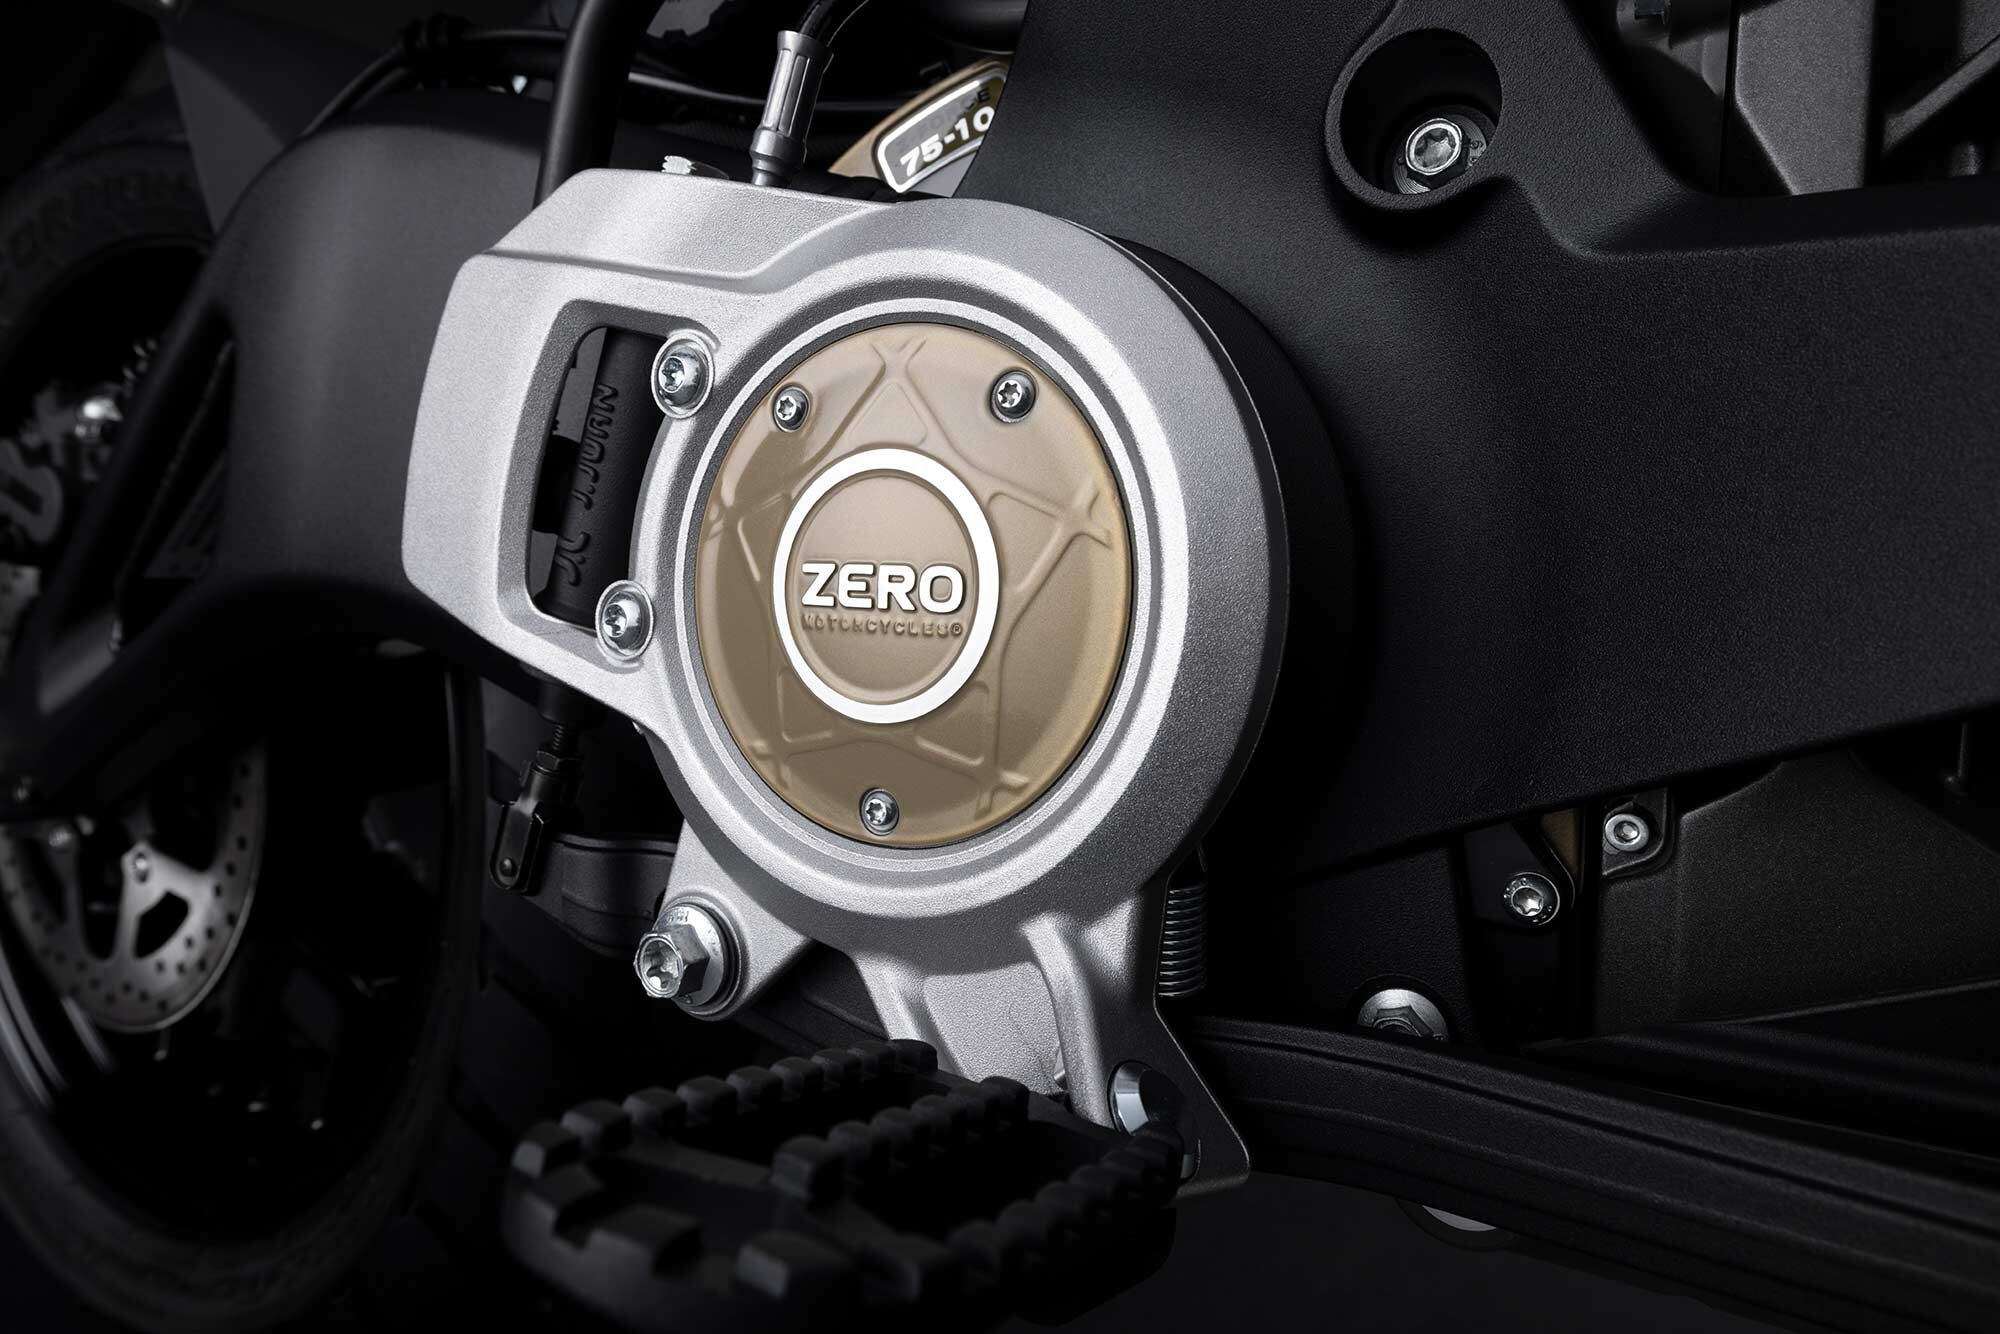 More stator windings give the DSR/X’s motor more torque than the SR/S sportbike.